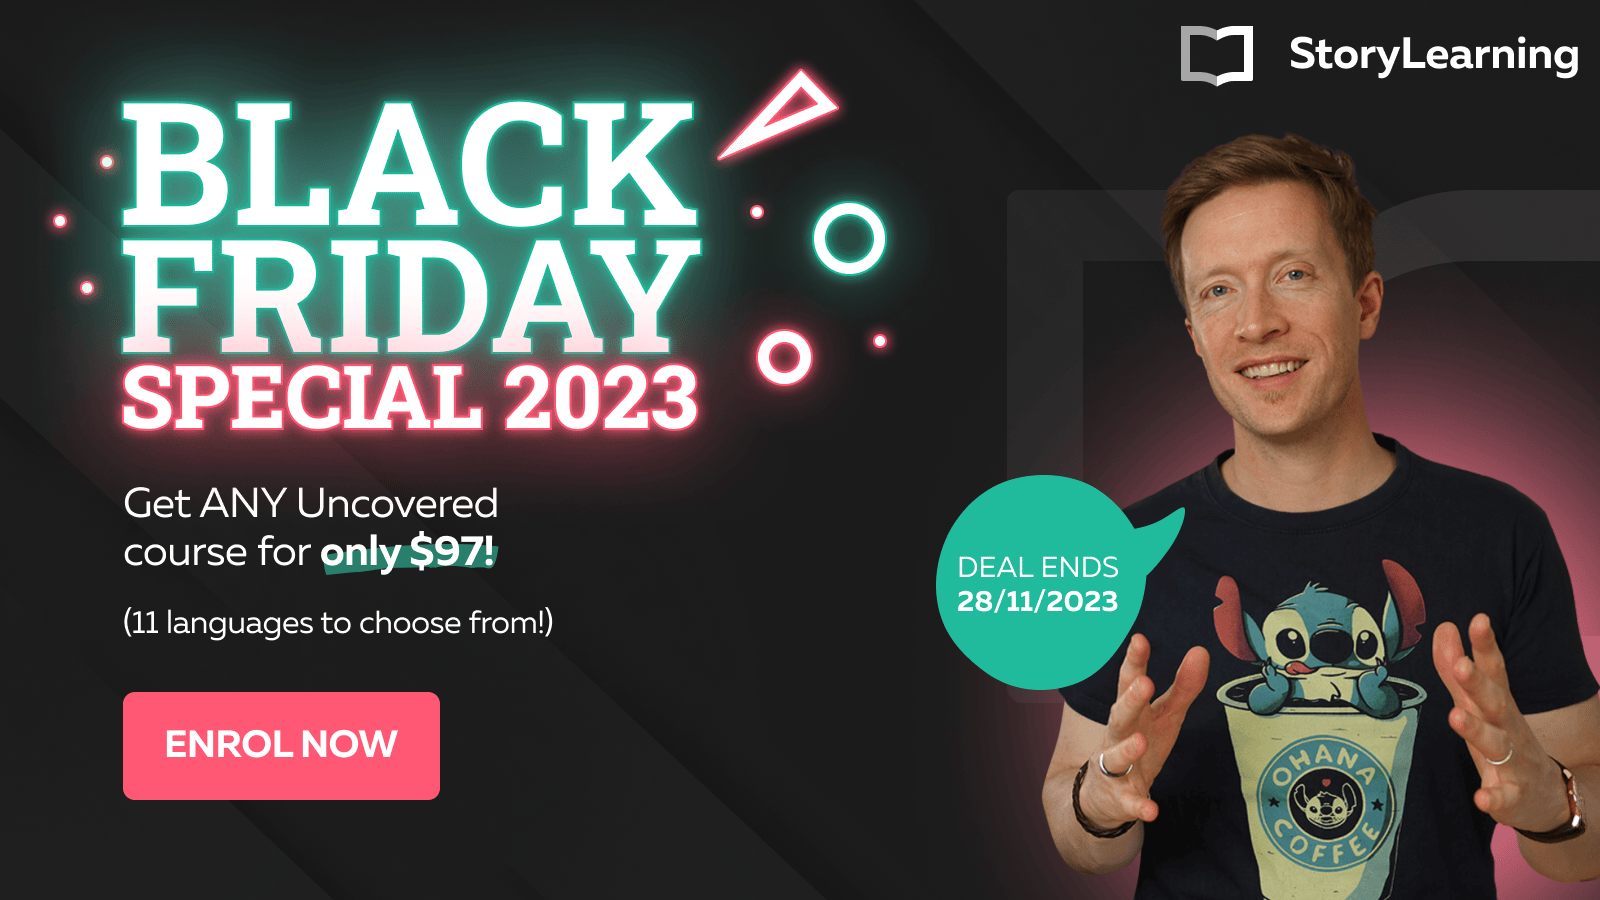 $200 OFF UNCOVERED Storylearning Courses by Olly Richards